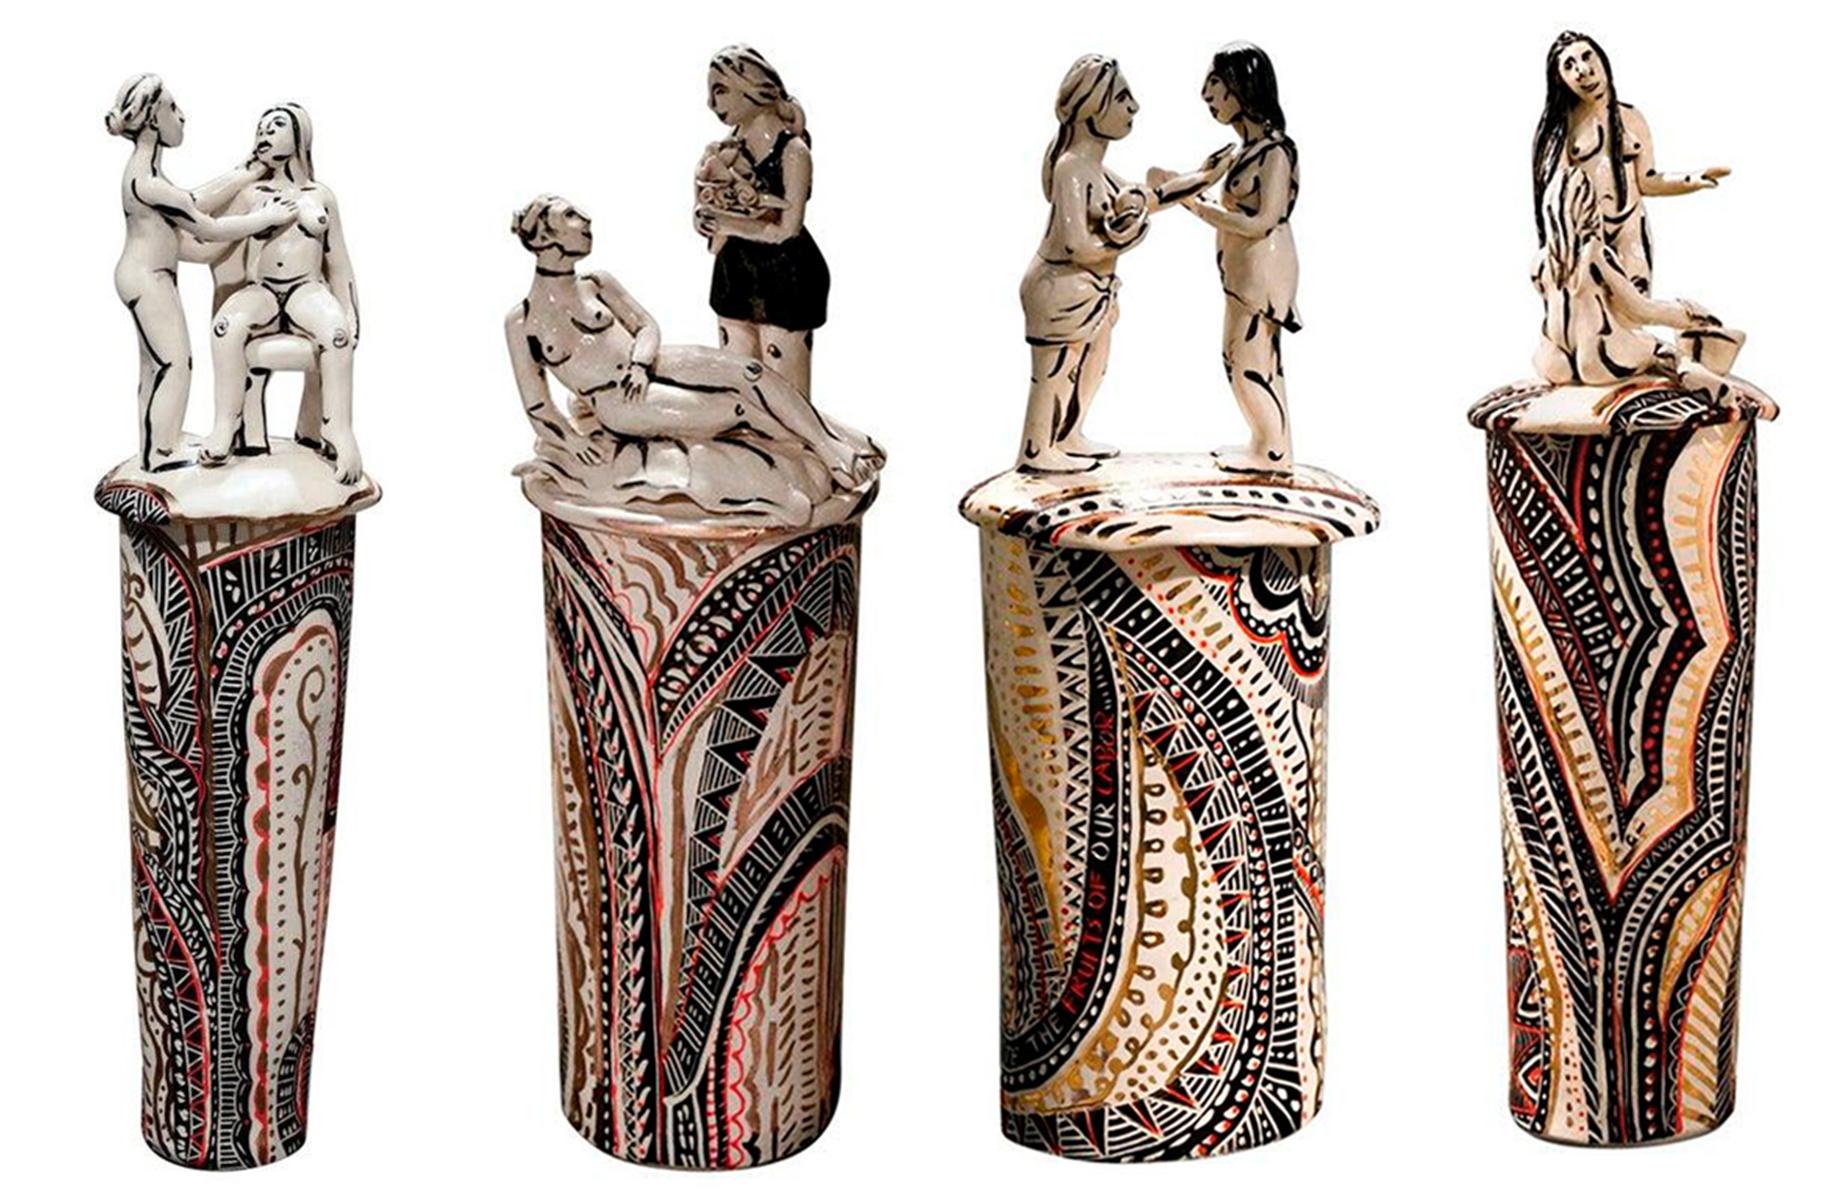 Four Sculptures from the Historic Jar Series. Porcelain with hand-painted detail